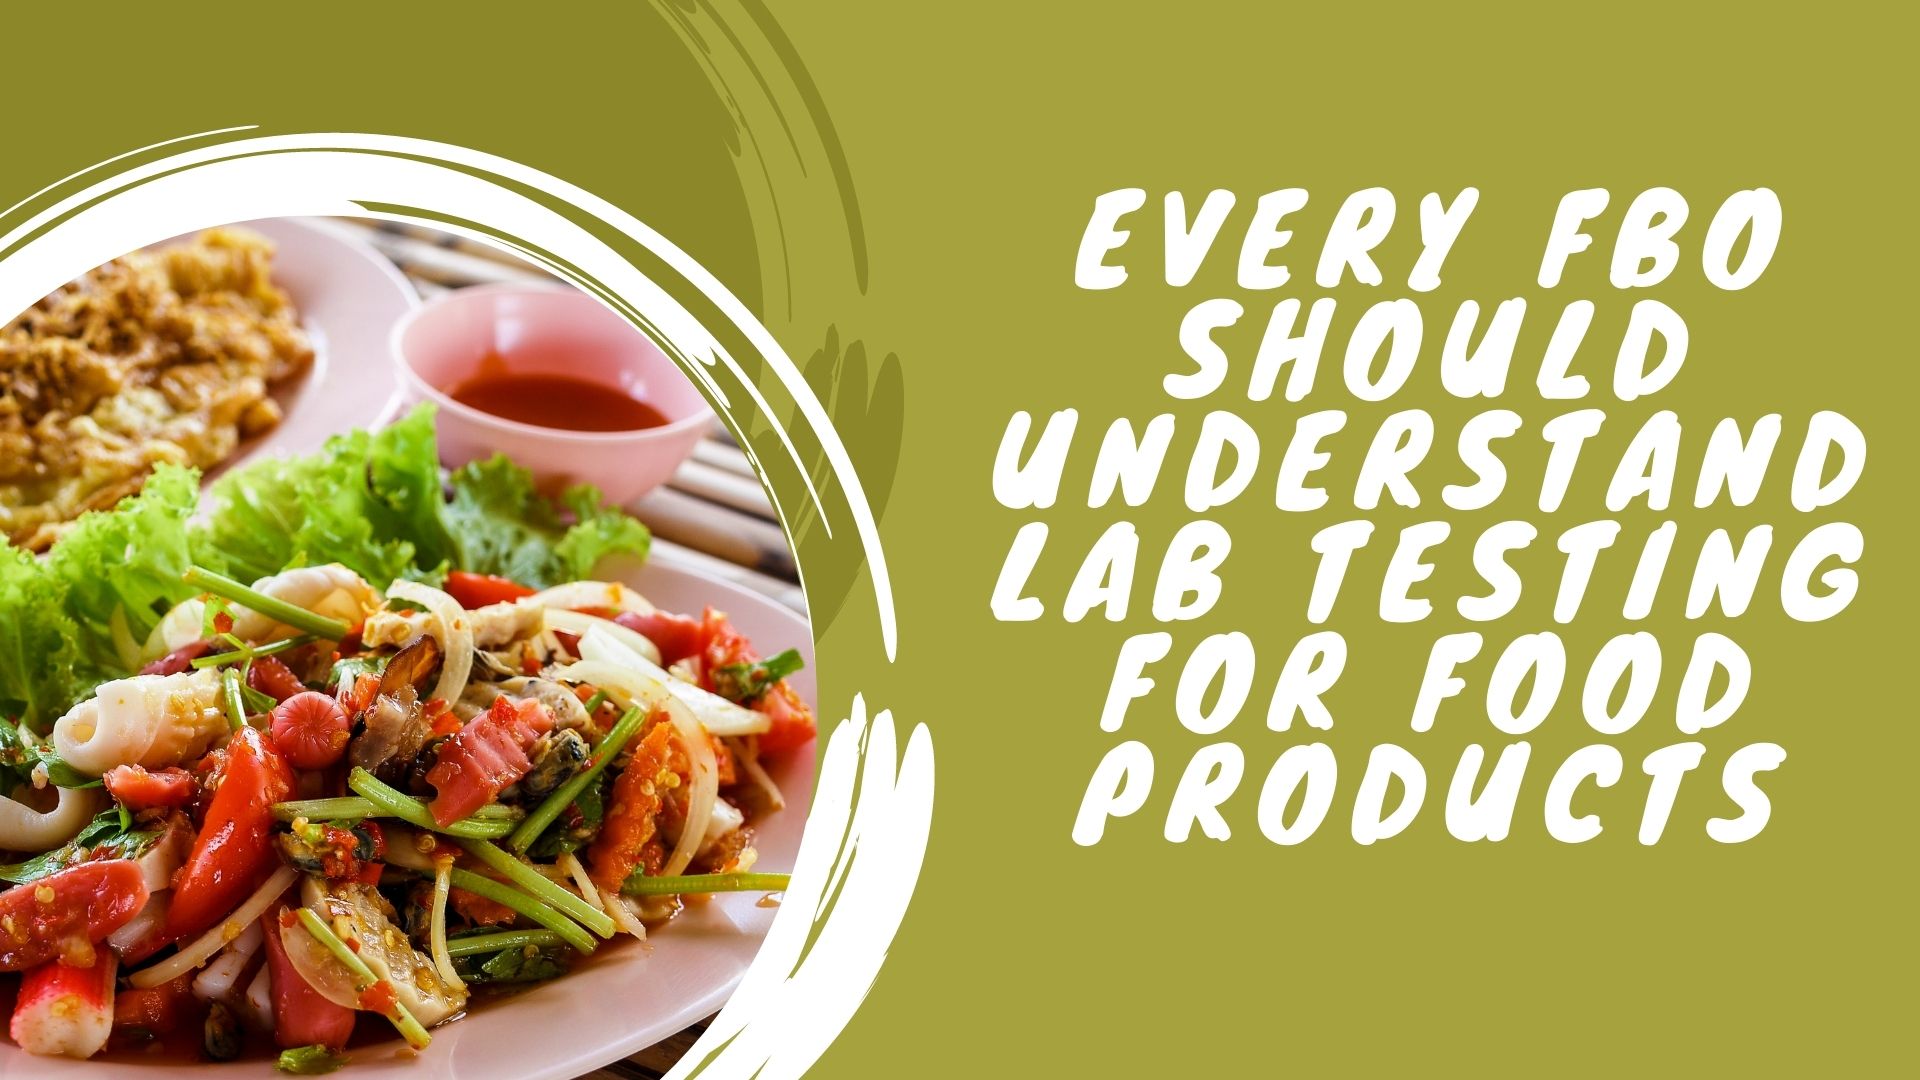 Every FBO Should Understand Lab Testing for Food Products